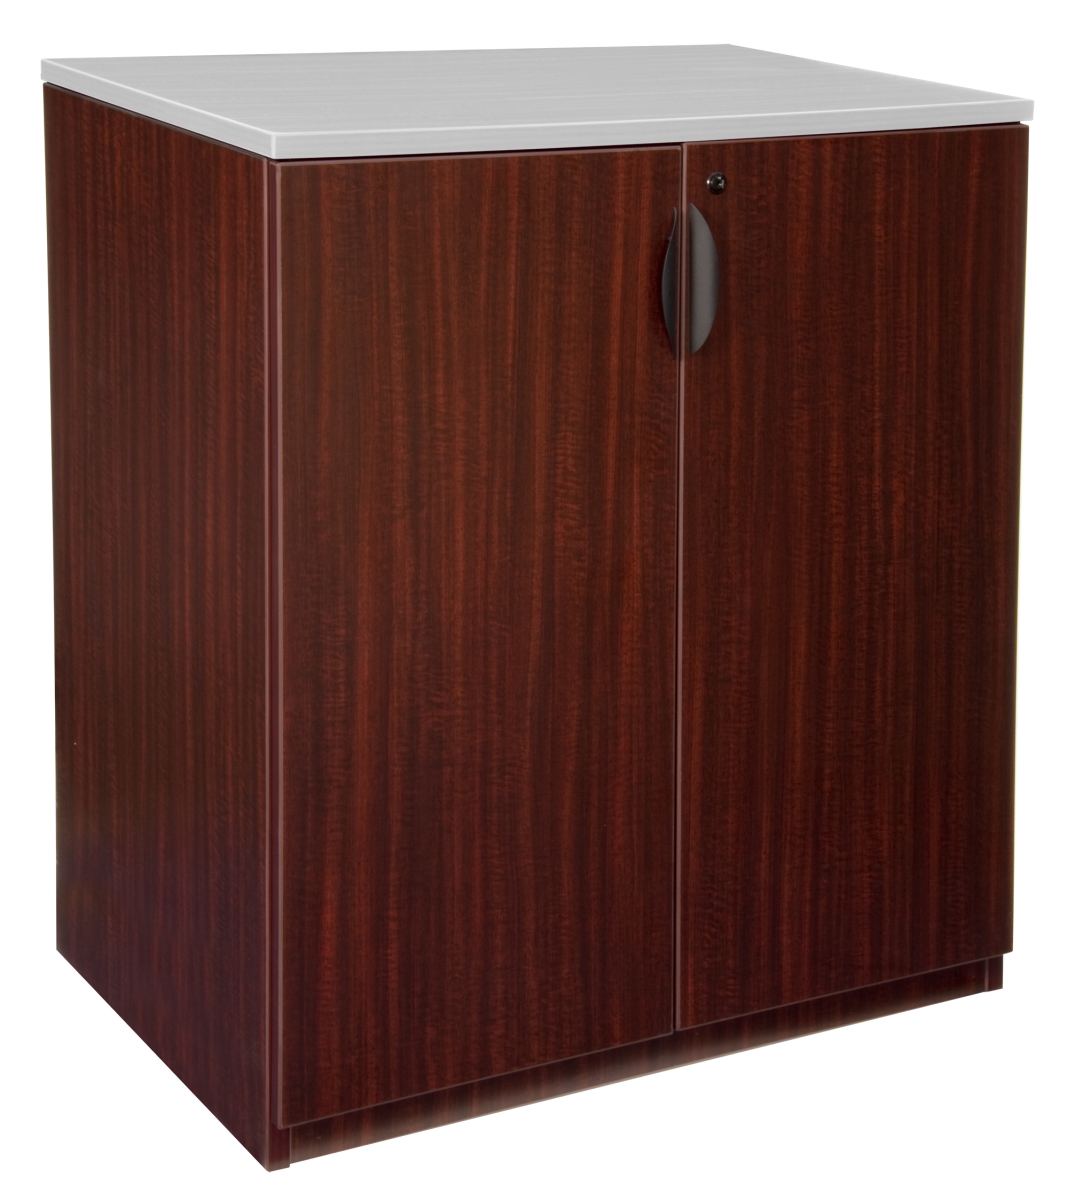 Lsc4136mh Legacy Stand Up Storage Cabinet Without Top, Mahogany